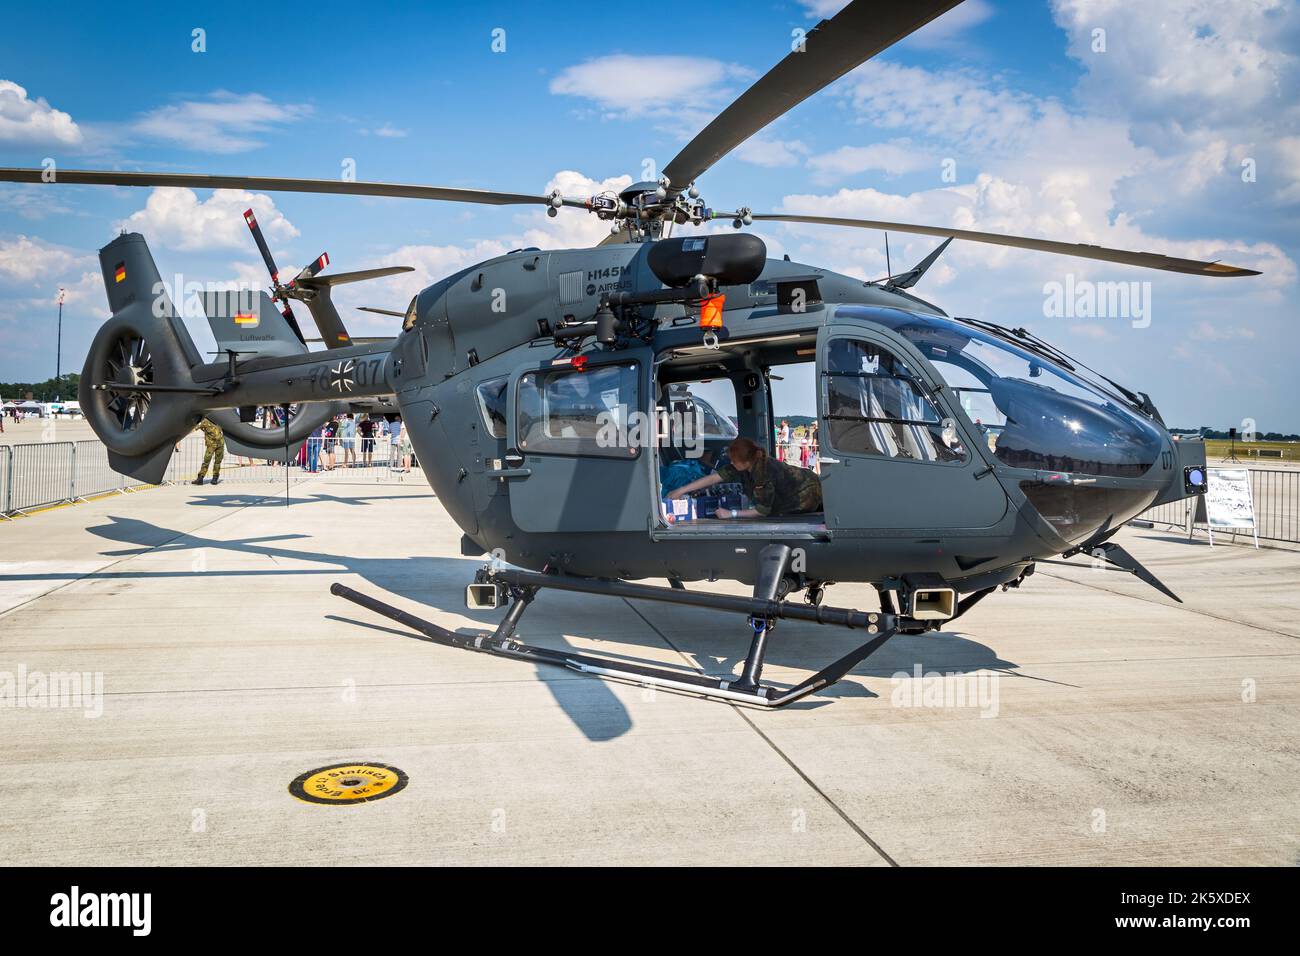 German Air Force Airbus H145M military utility helicopters on the tarmac of Wunstorf Airbase. Germany - June 9, 2018 Stock Photo